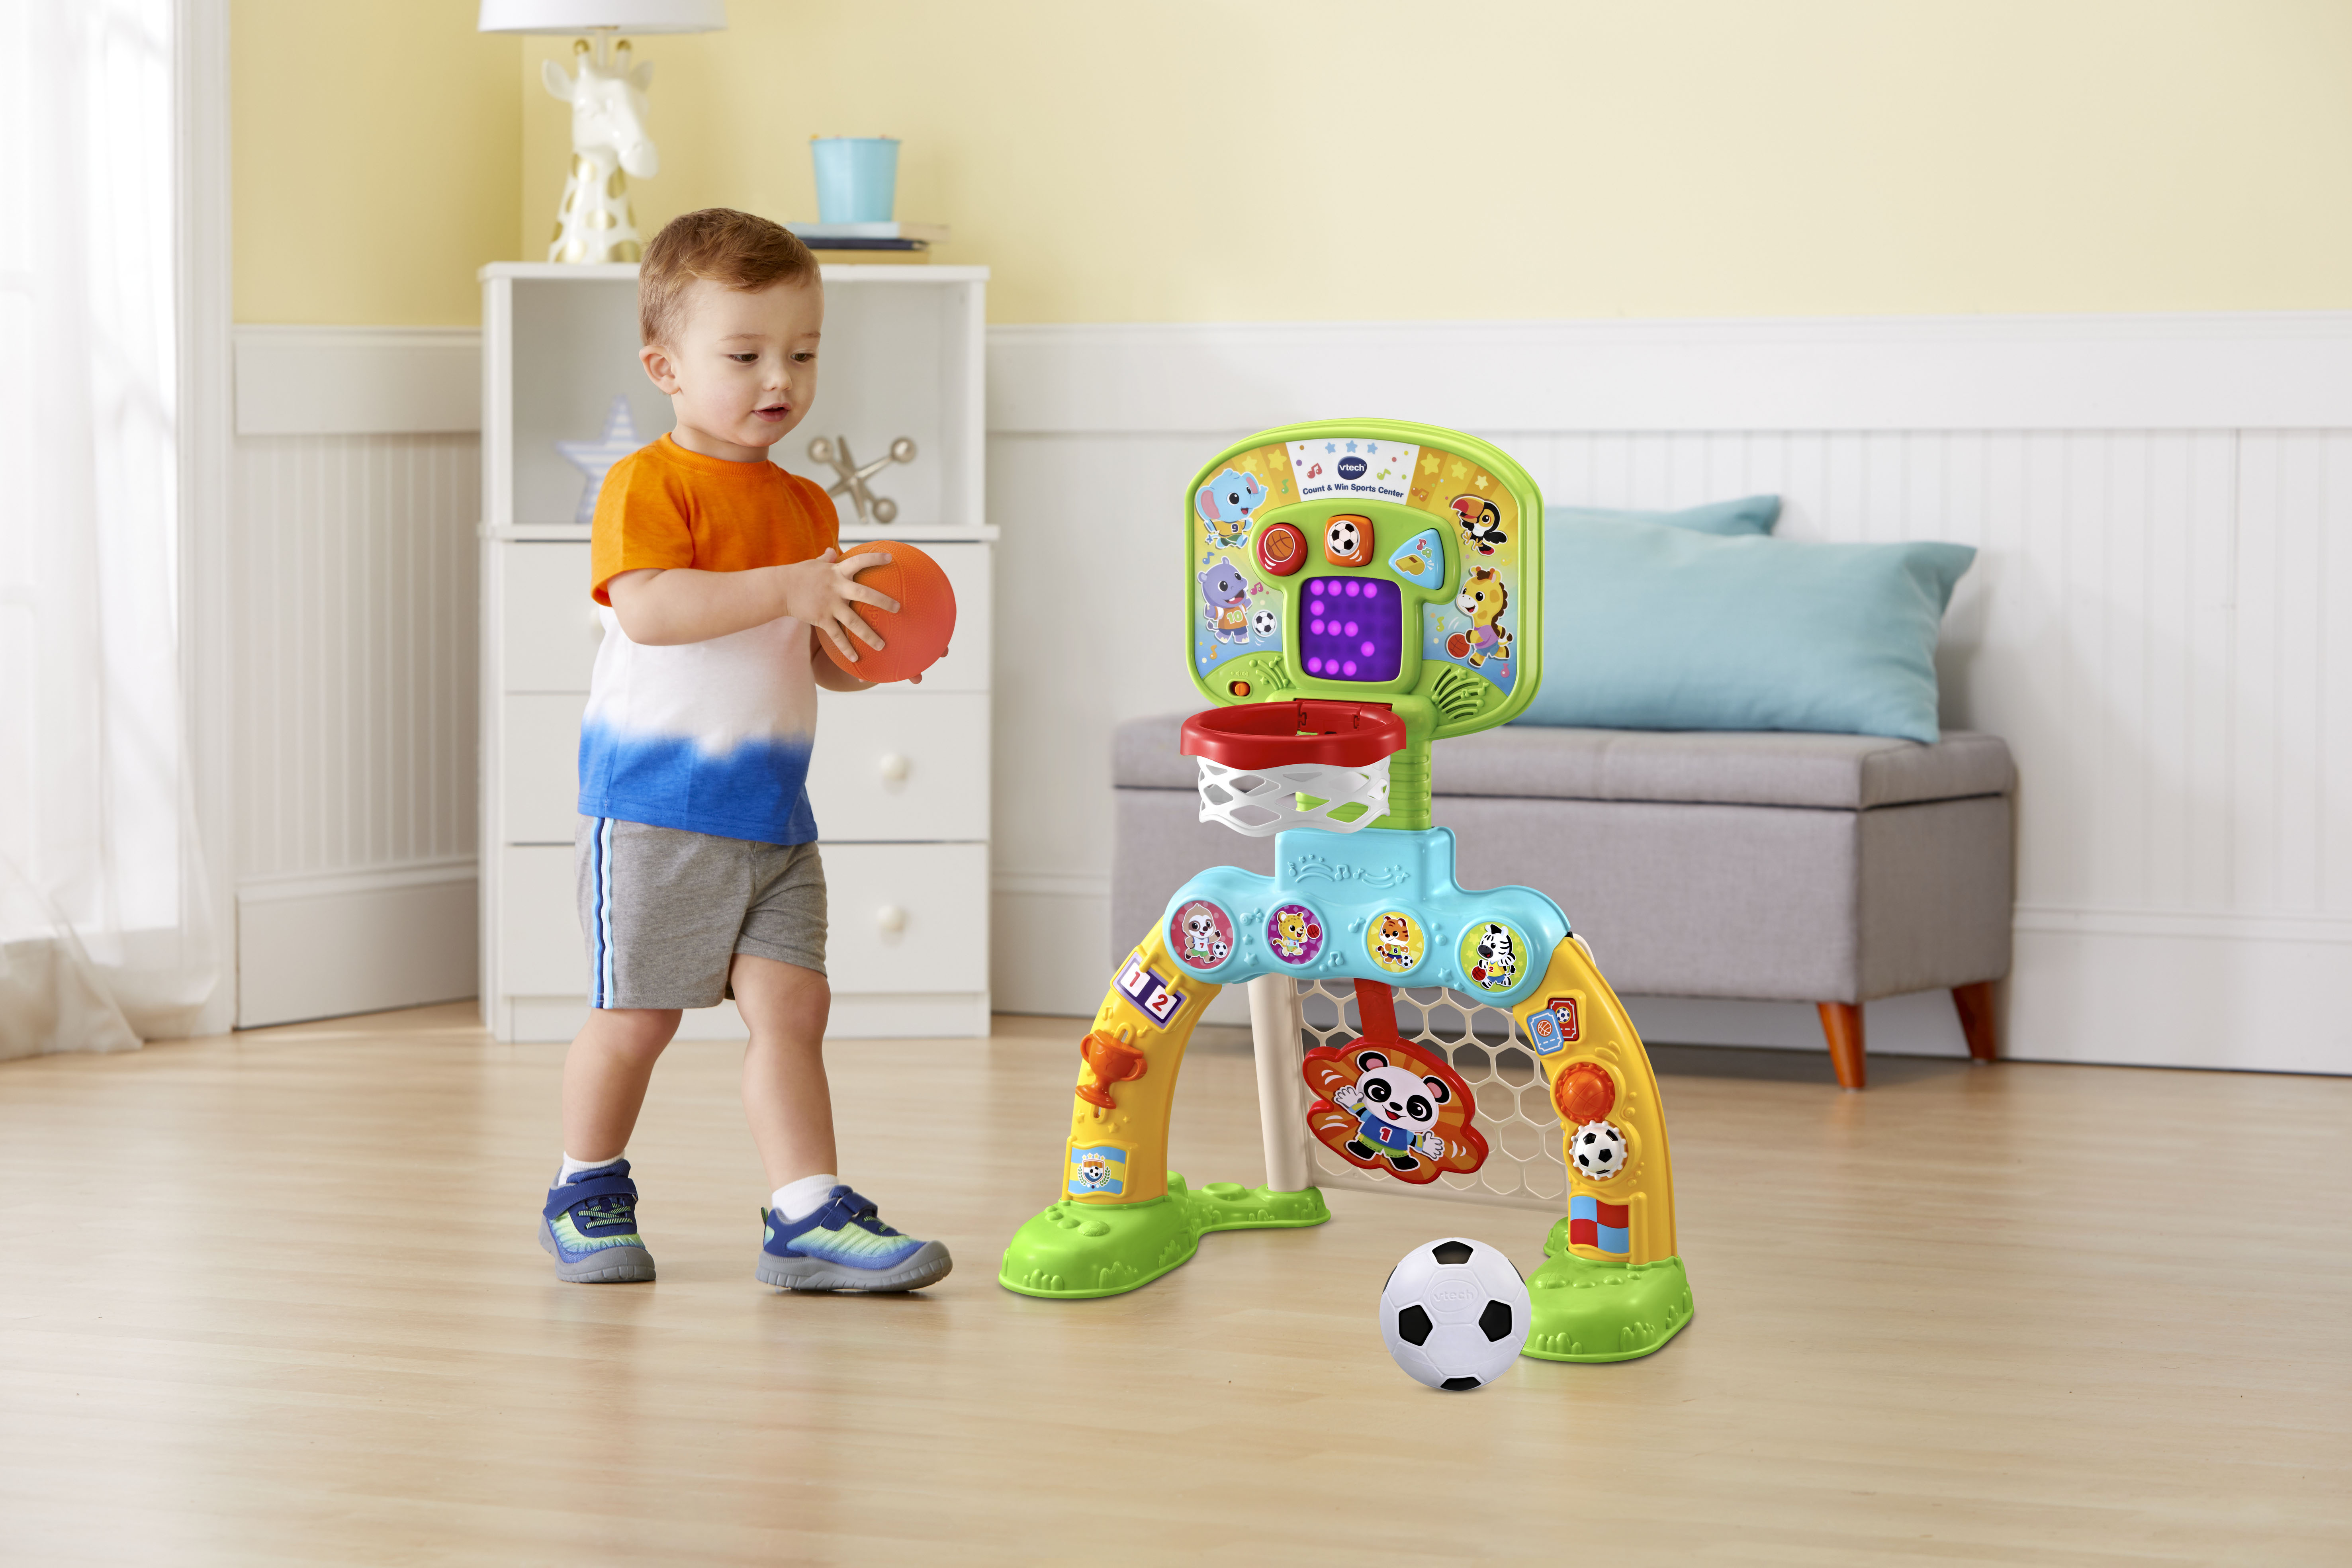 VTech Count & Win Sports Center, Basketball and Soccer Toy for Toddlers, Teaches Physical Activity - image 6 of 13